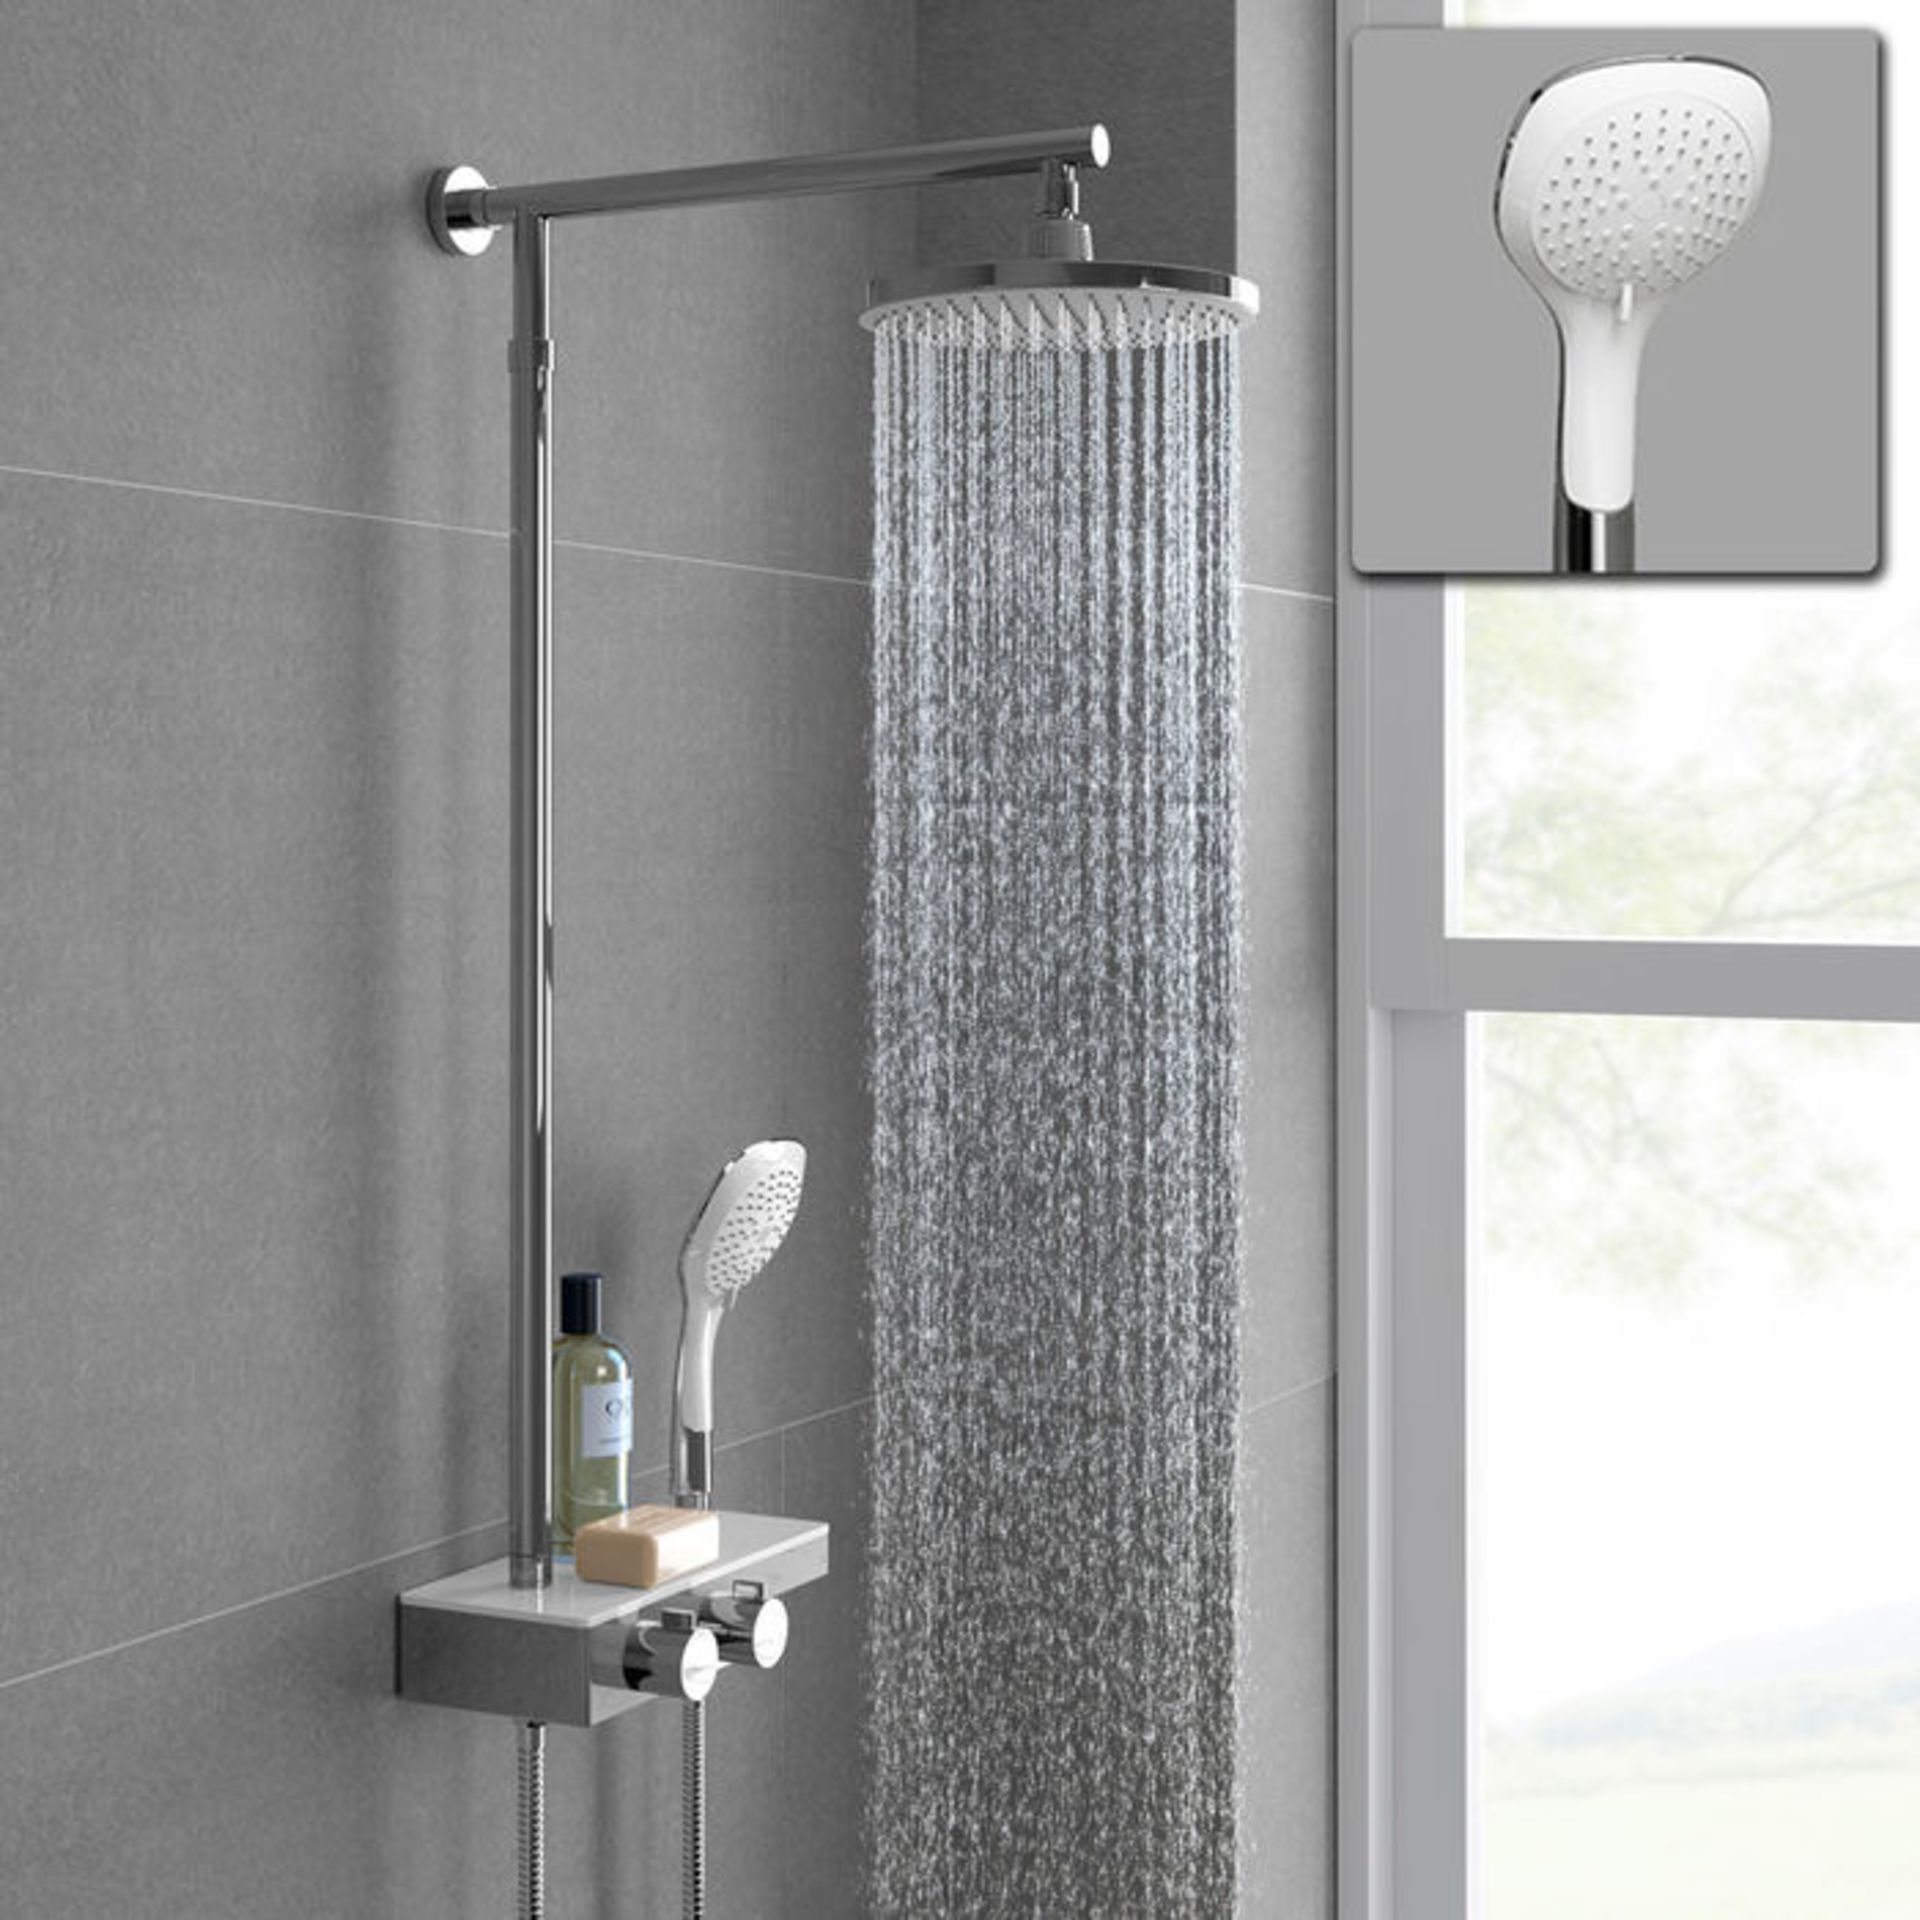 (PO150) Round Exposed Thermostatic Mixer Shower Kit Medium Head & Shelf. Cool to touch shower for